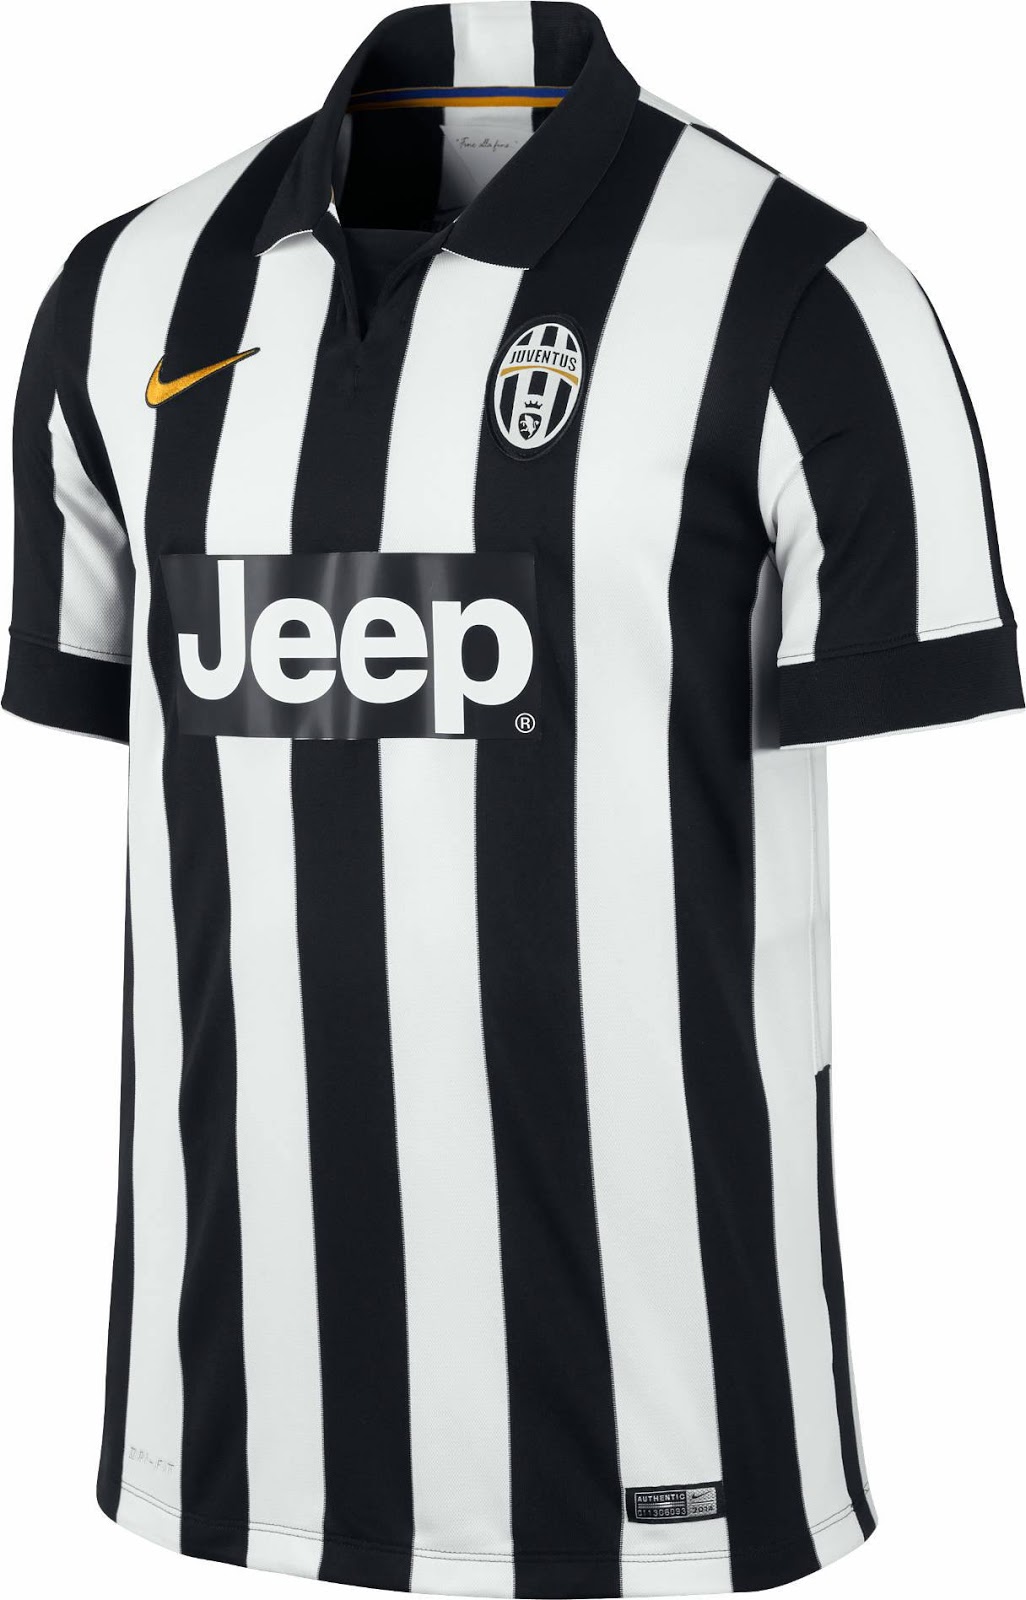 highest selling football jersey